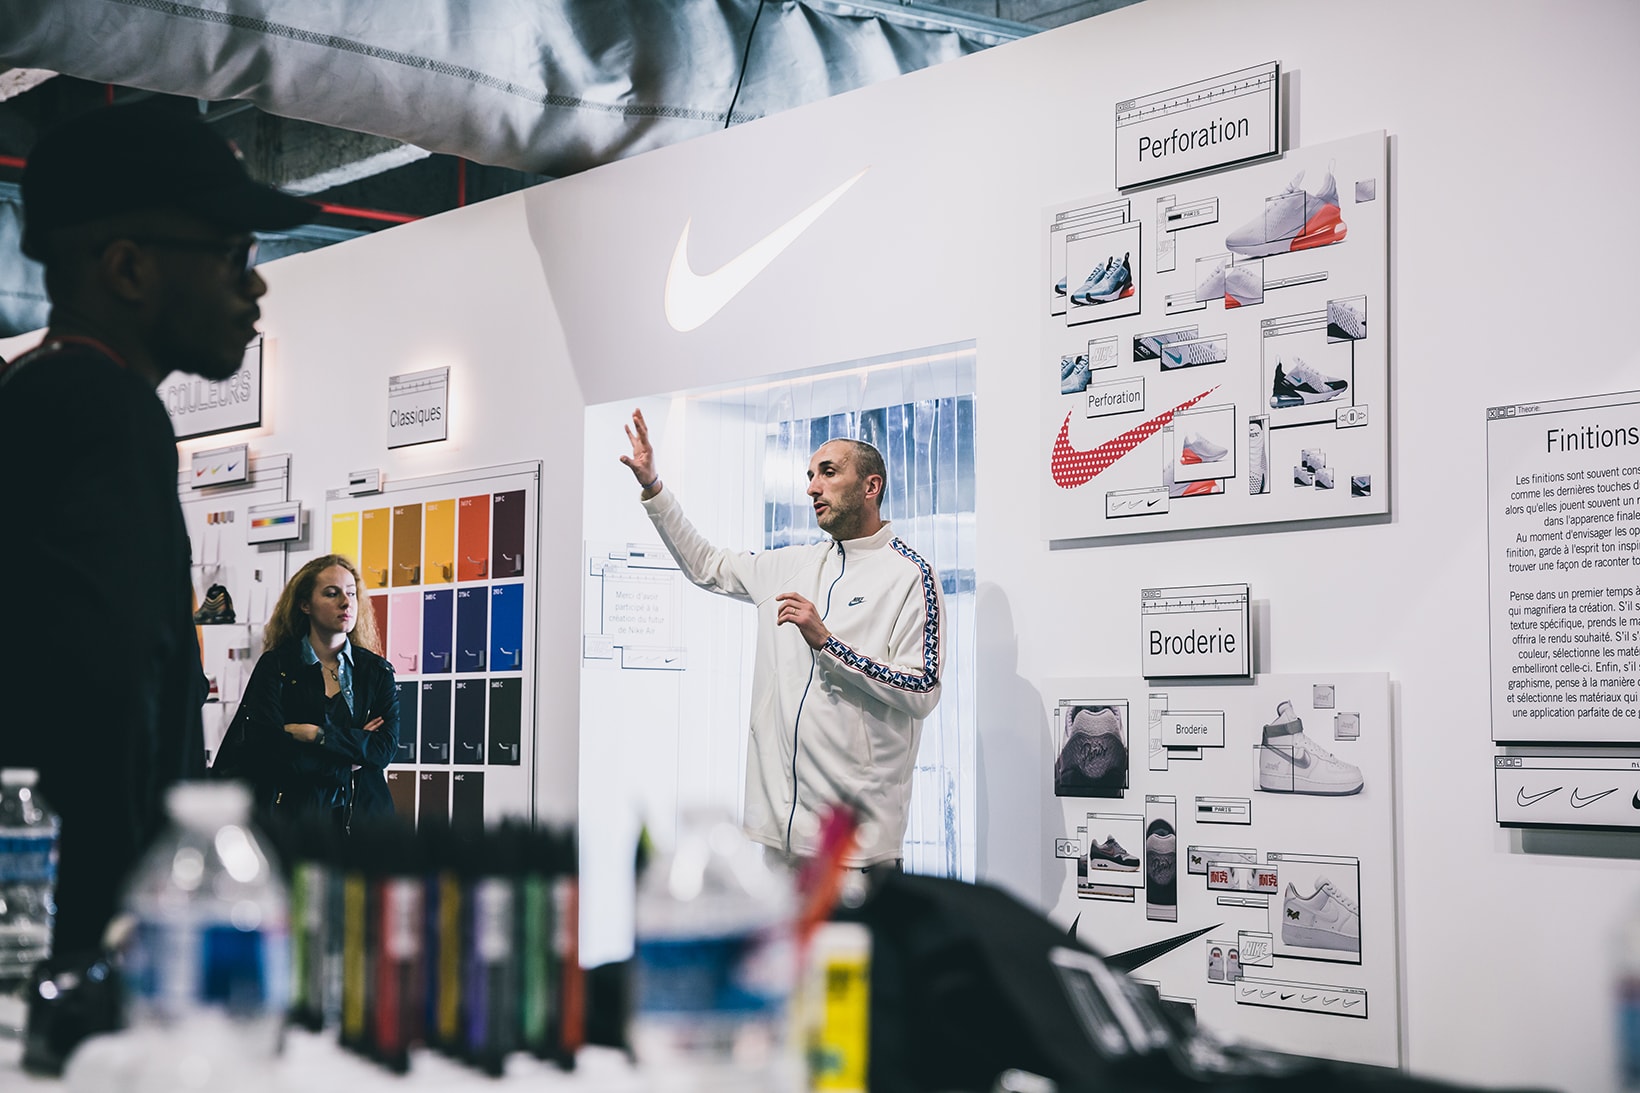 Nike "Paris On Air" Event Redesign Nike Air Max Gallery Caroline Fullerton Courtney Daily Marie Odinot